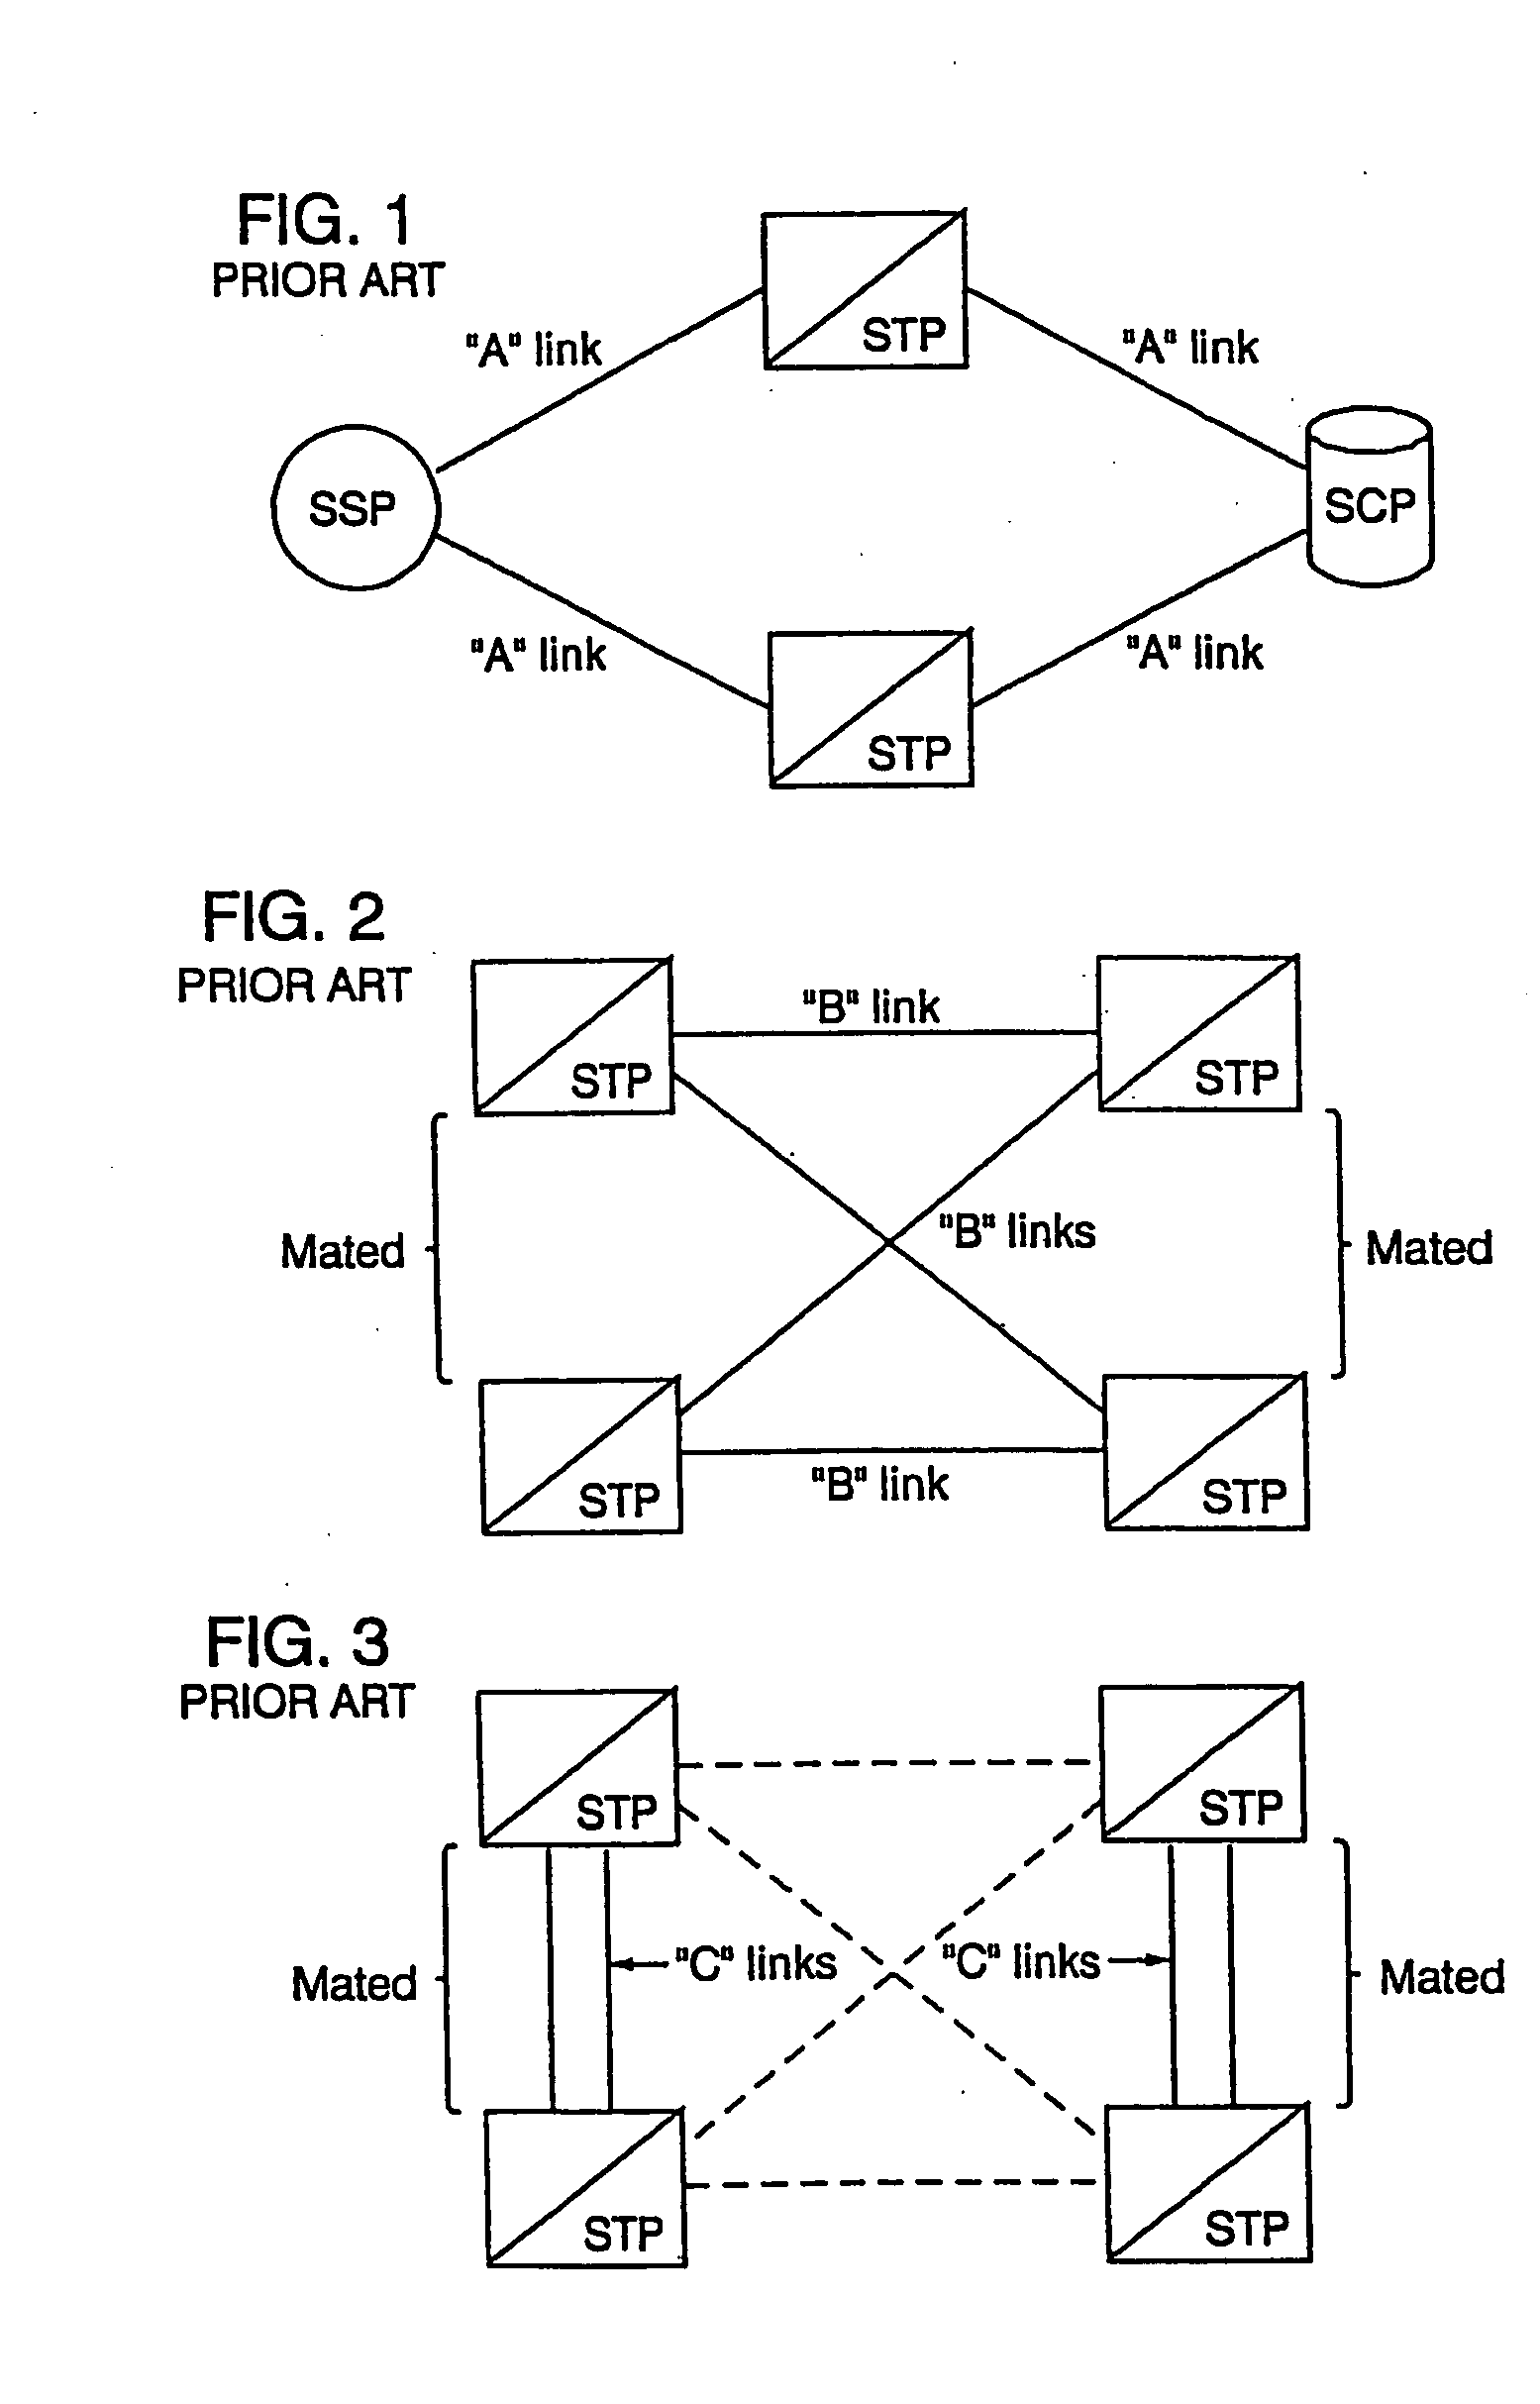 Methods and systems for communicating signaling system 7 (SS7) user part messages among SS7 signaling points (SPs) and internet protocol (IP) nodes using signal transfer points (STPs)